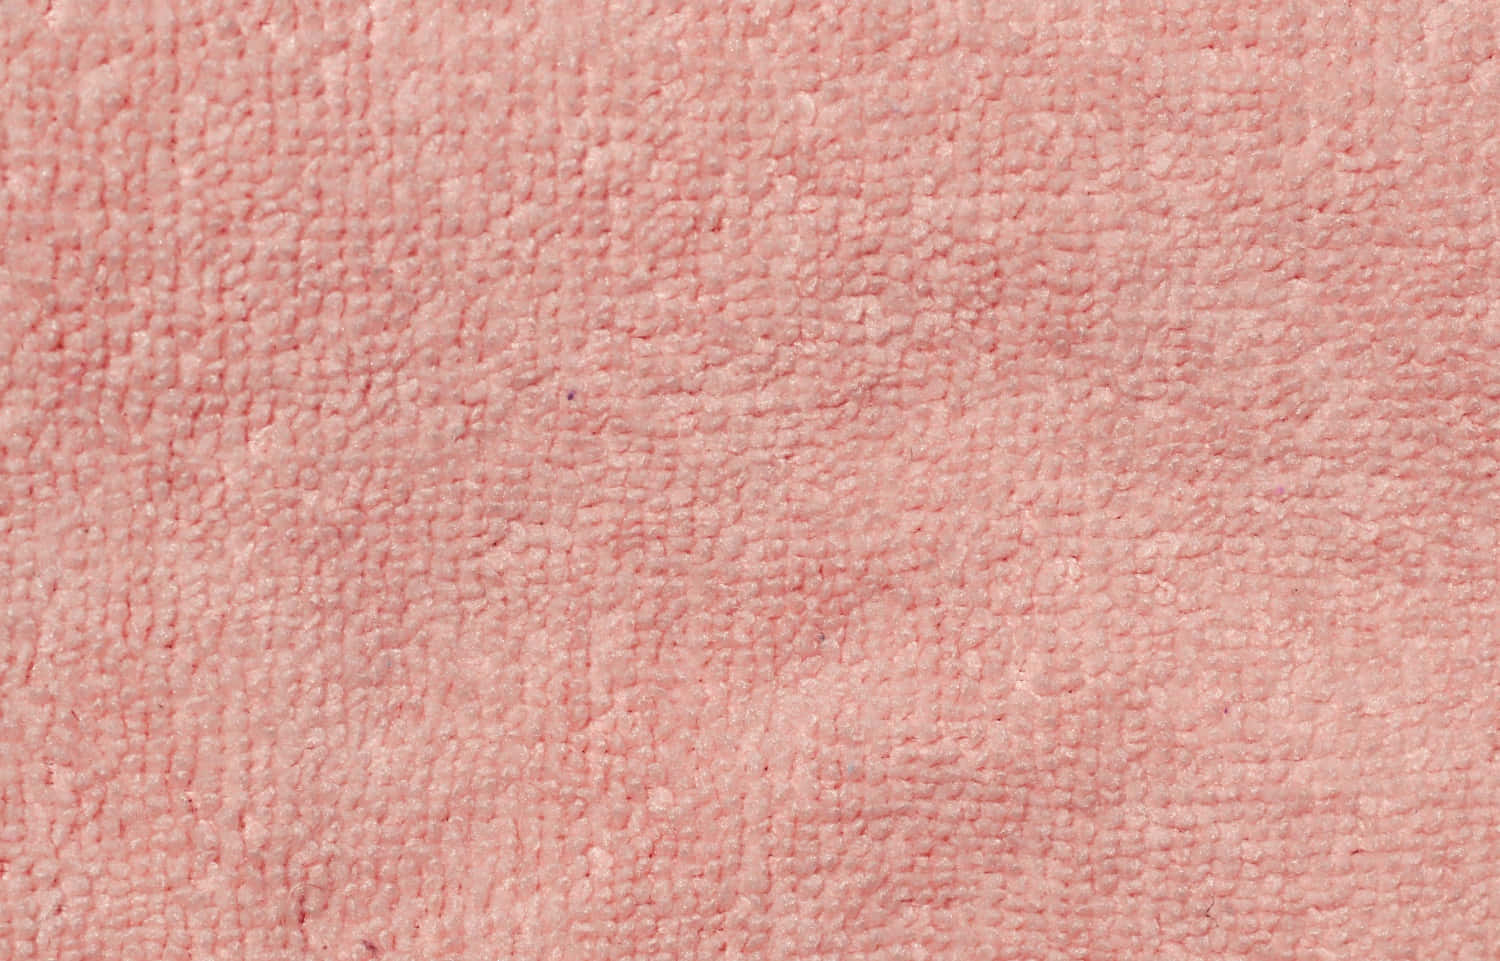 Fabric Texture Pictures Light Pink Fluffy Cotton